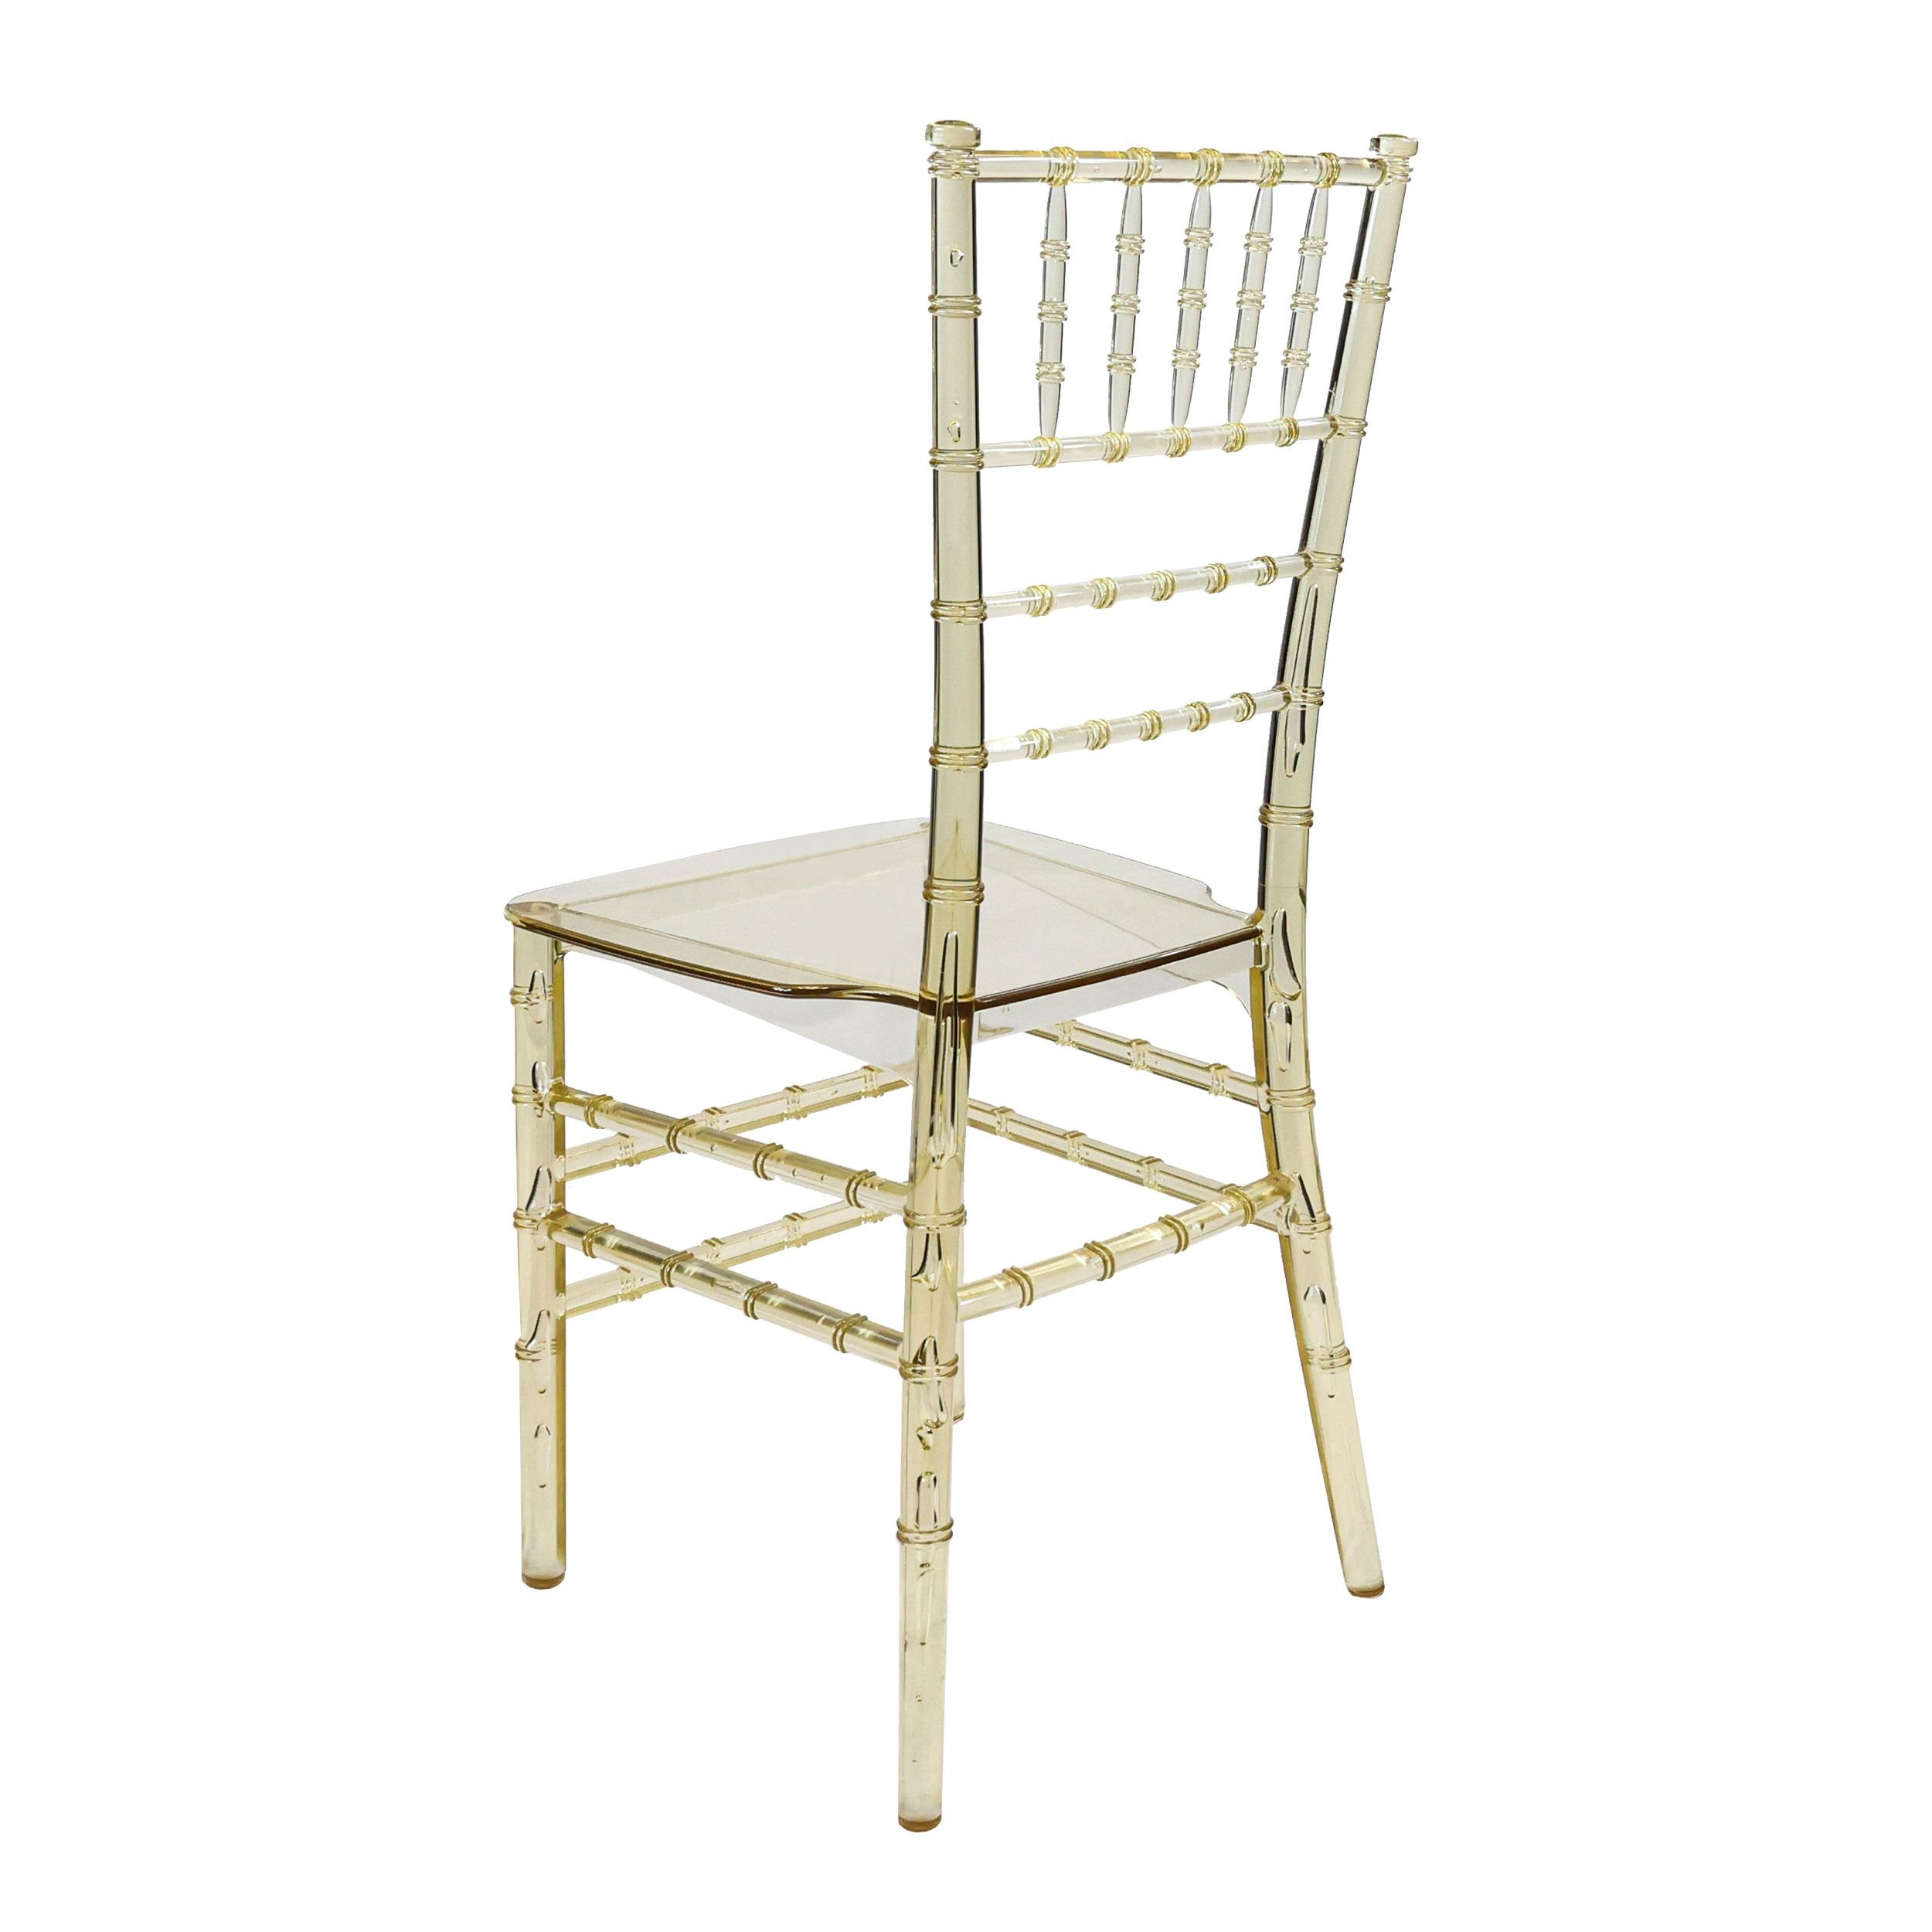 Chair Chiavari Resin Clear Gold Champagne Mono Frame ThinVisible Seat Z Series CCRCHG MONO THIN ZG T Back